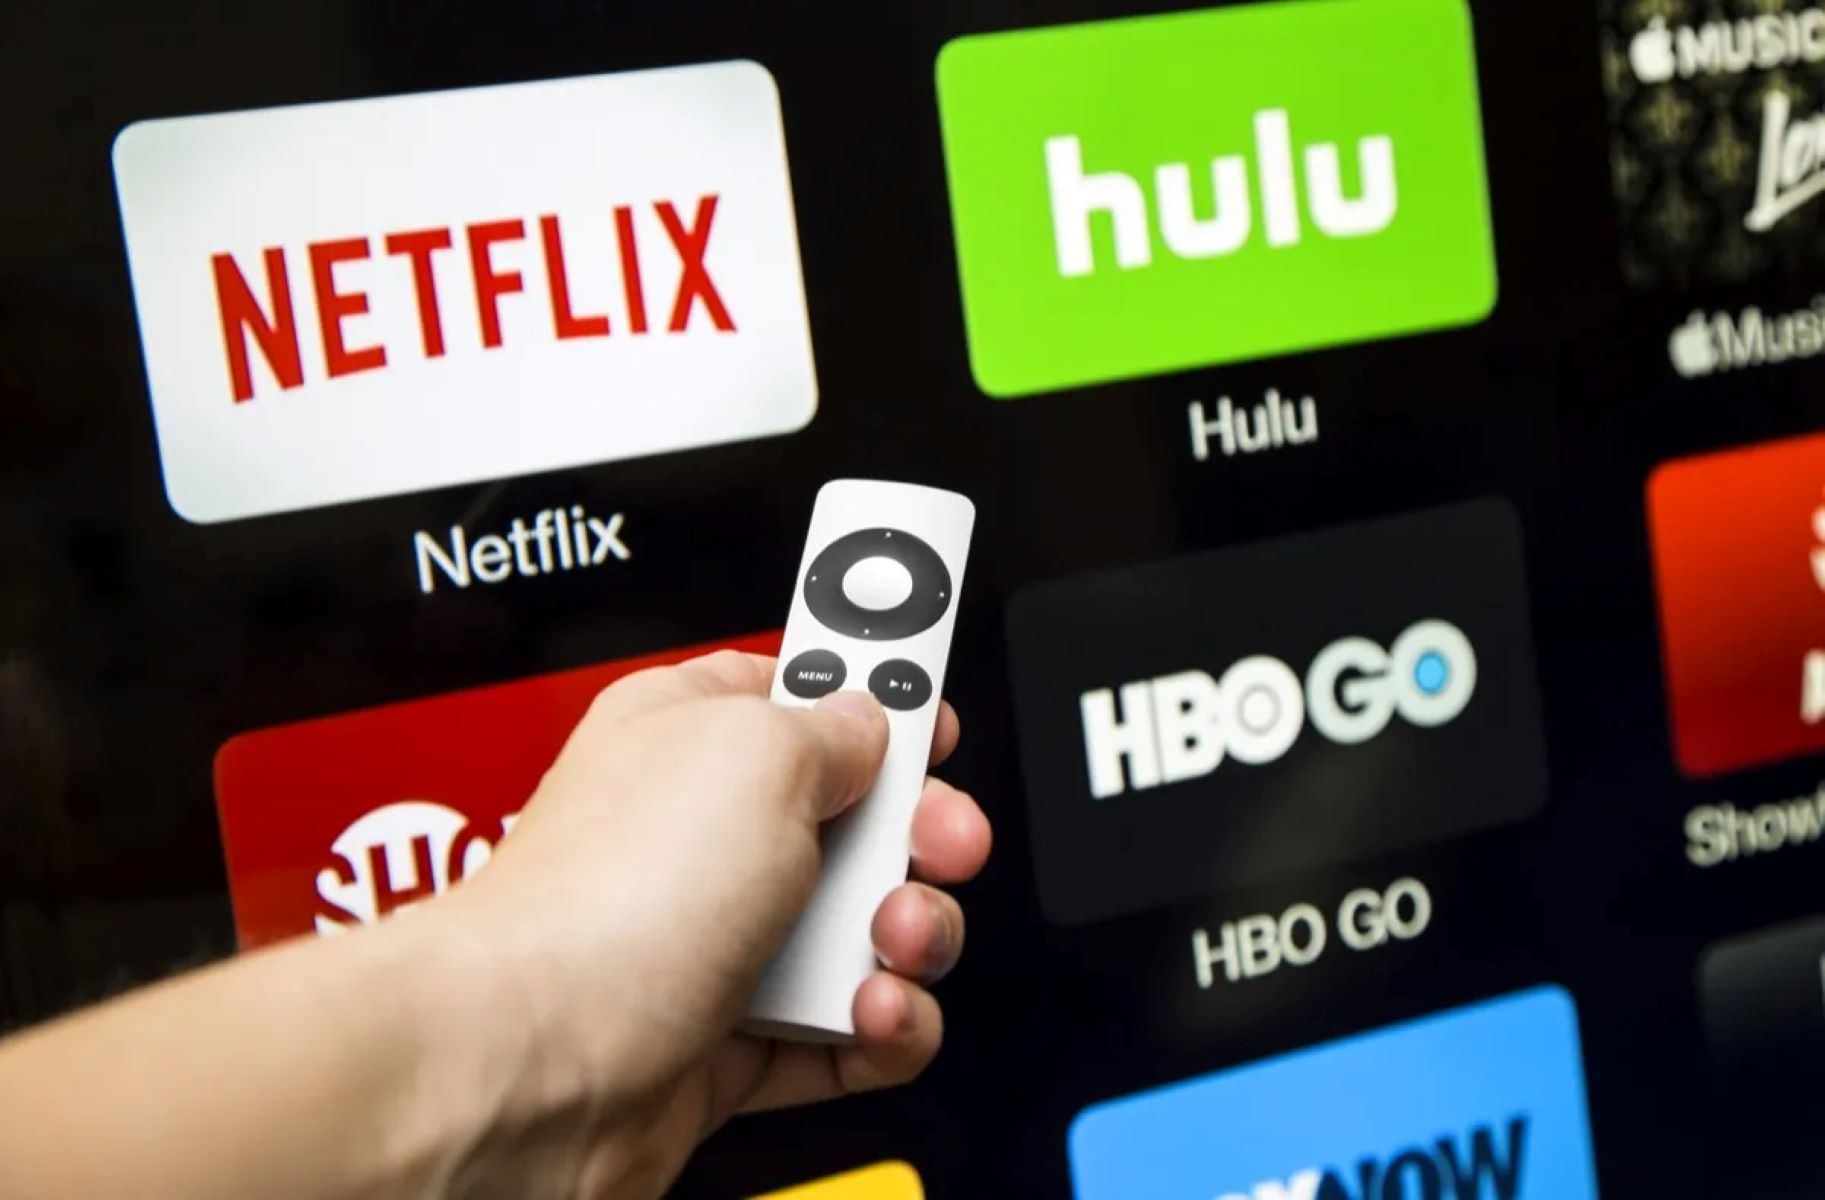 How To Watch Netflix On Apple TV